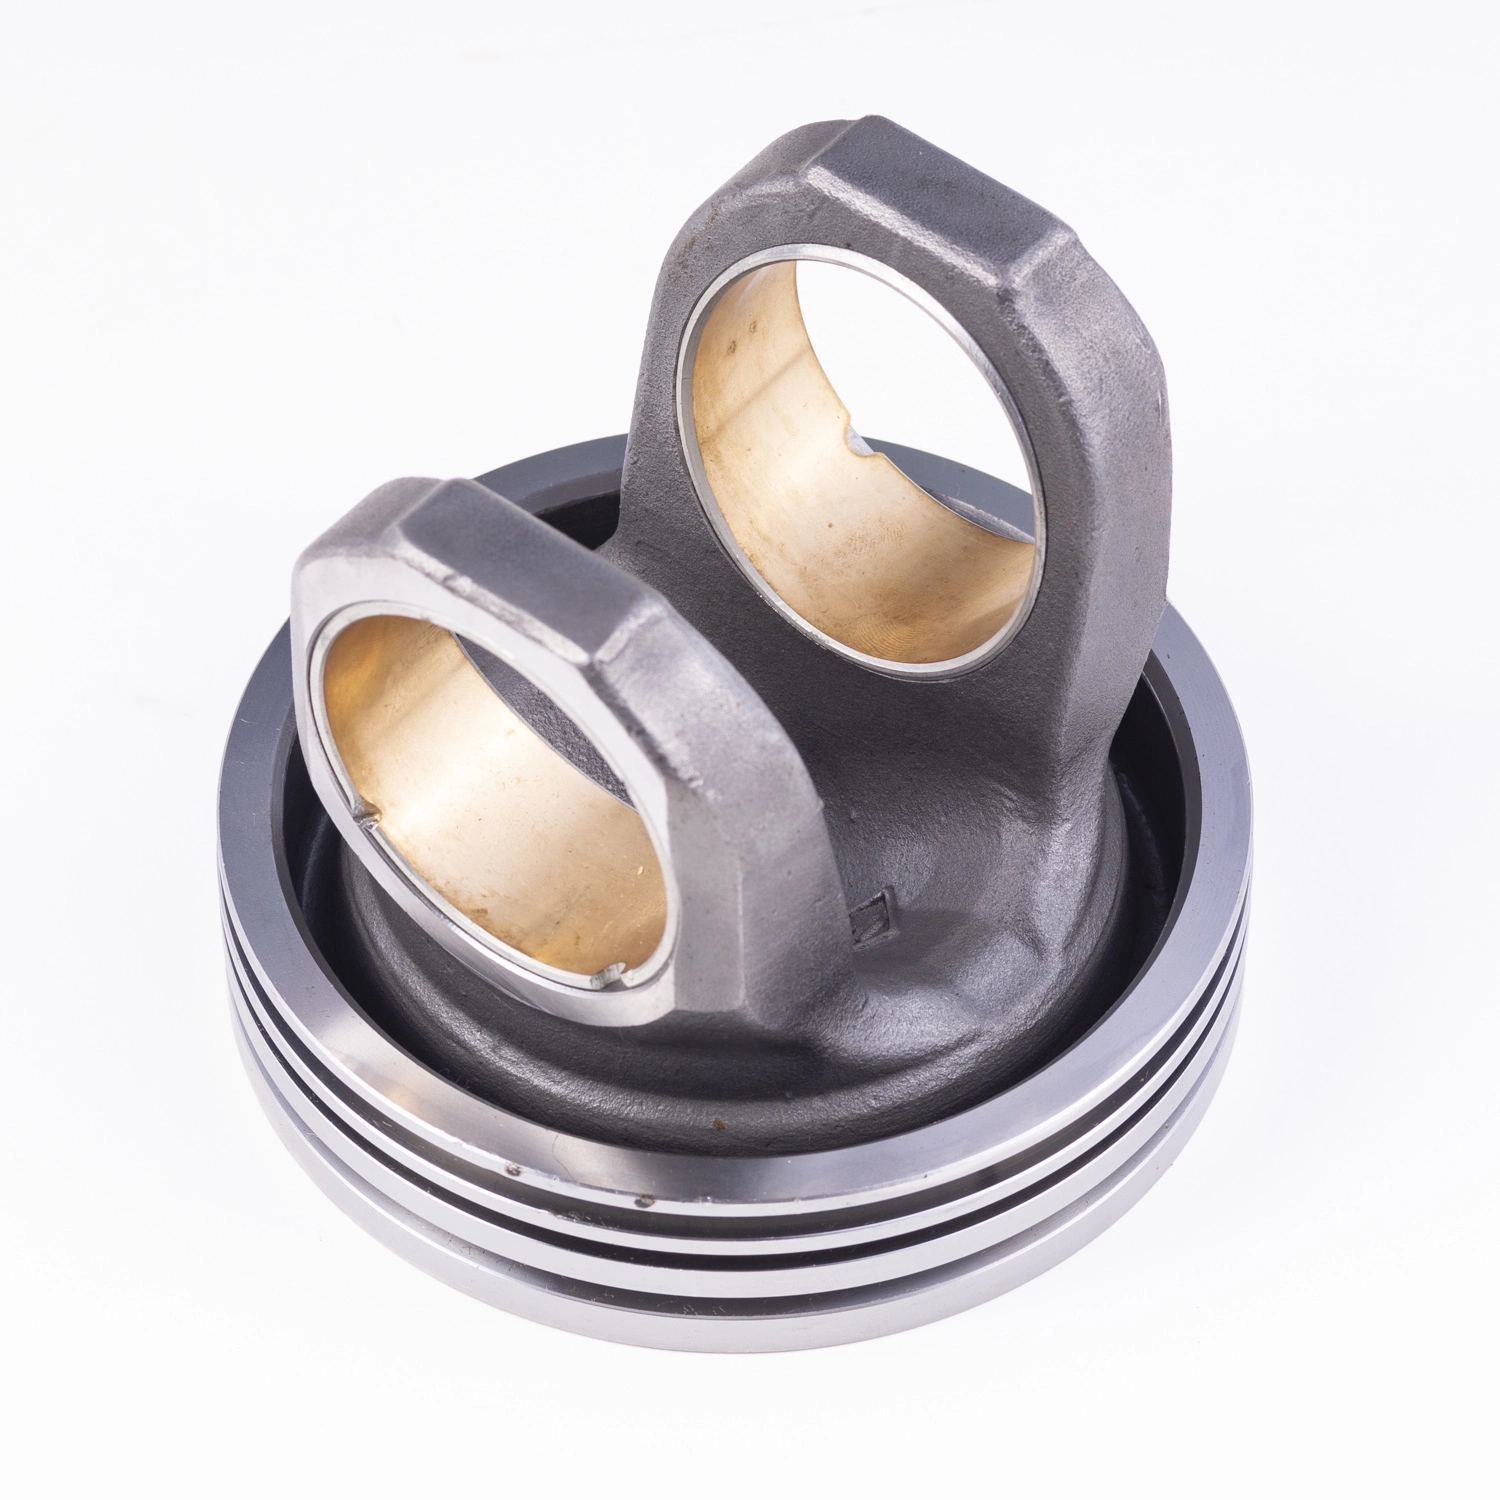 Investment Casting Steel Piston for Cat C9 Diesel Engine Aftersales Market